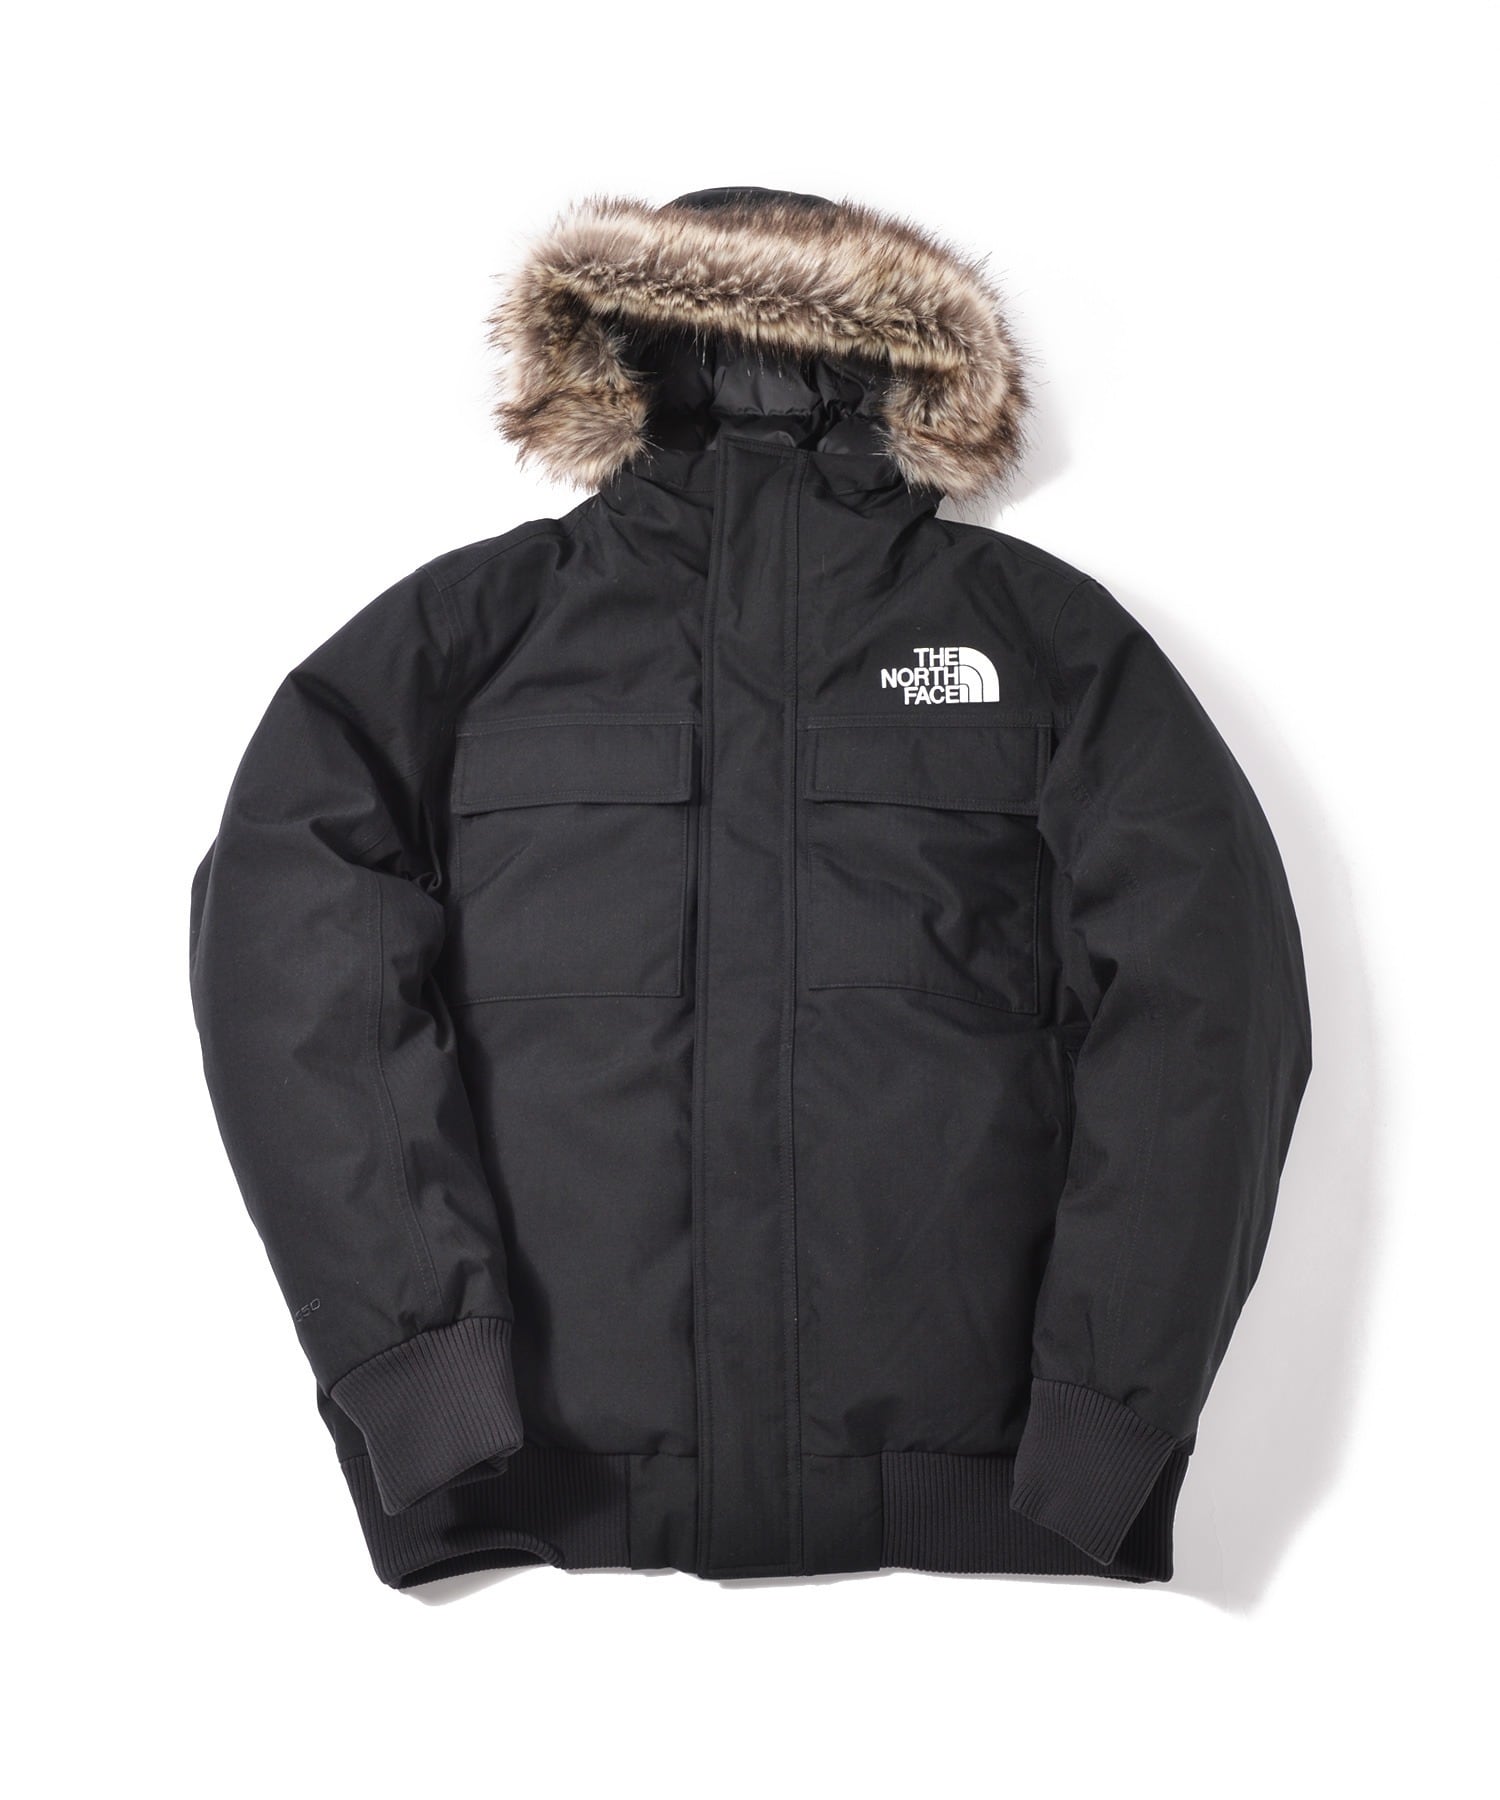 THE NORTH FACE ザノースフェイス Recycled Gotham jacket フーディー ...